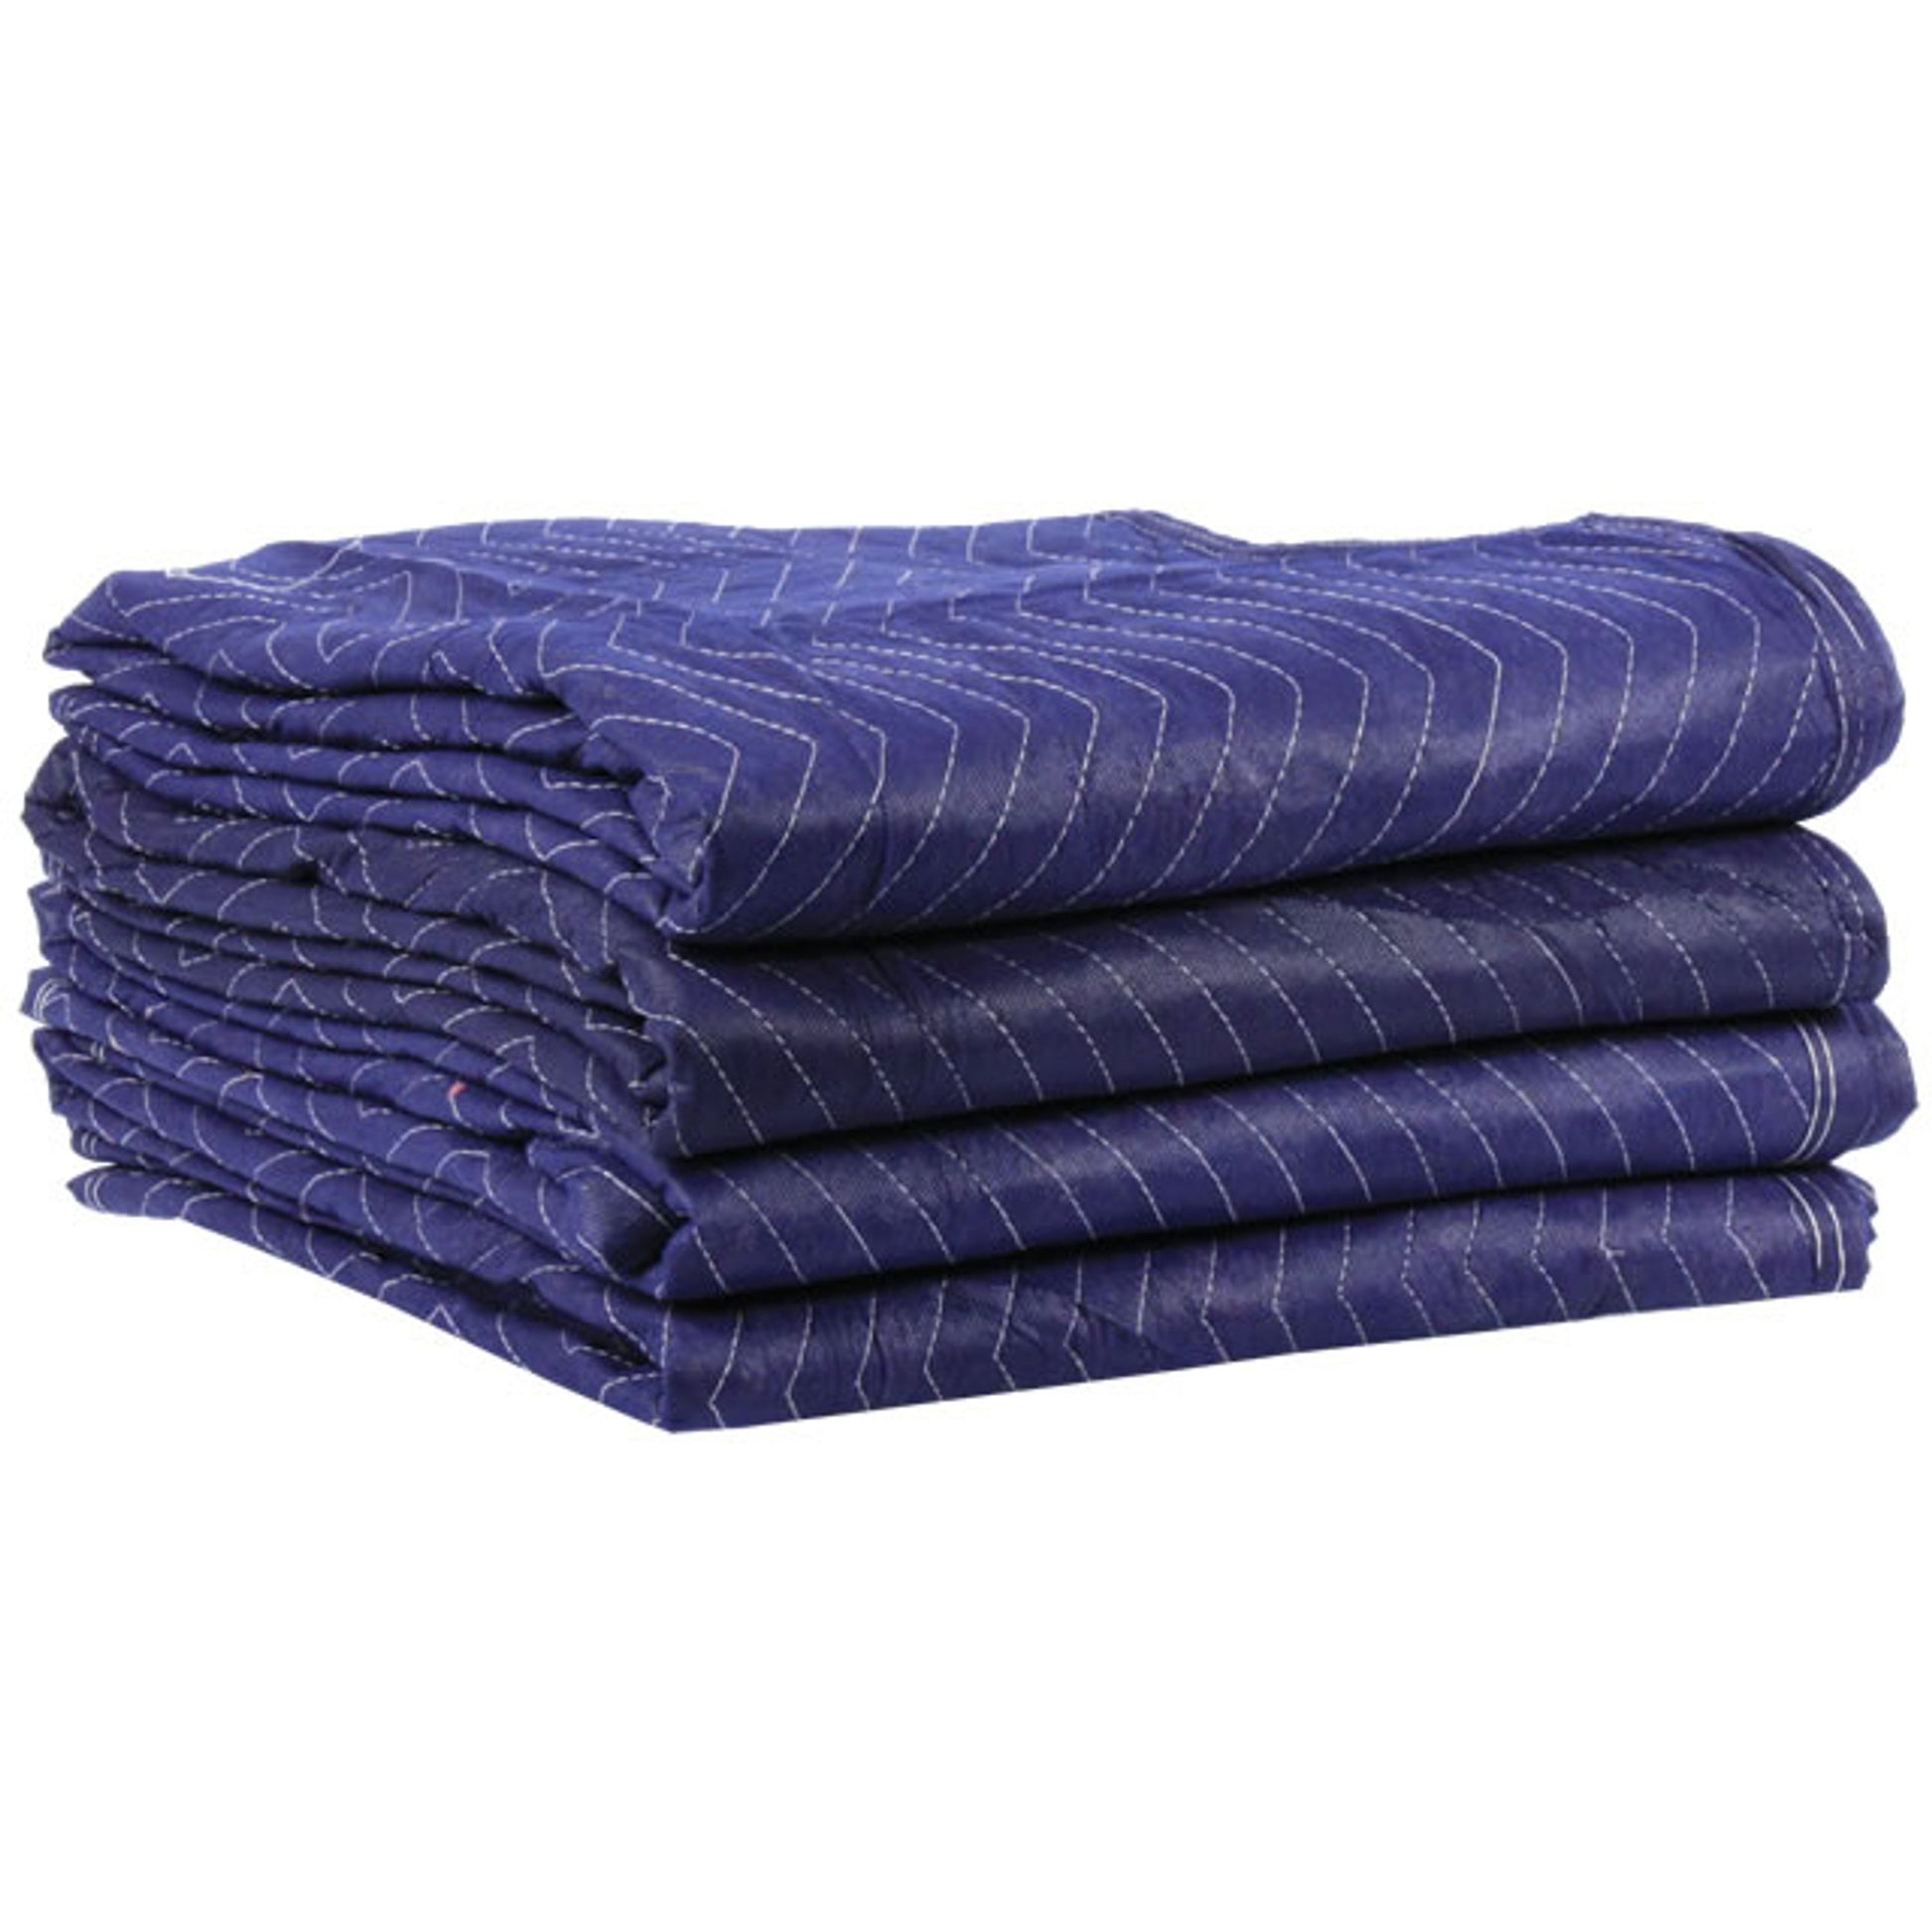 Moving Blankets- Econo Saver 4-Pack image 1 of 11